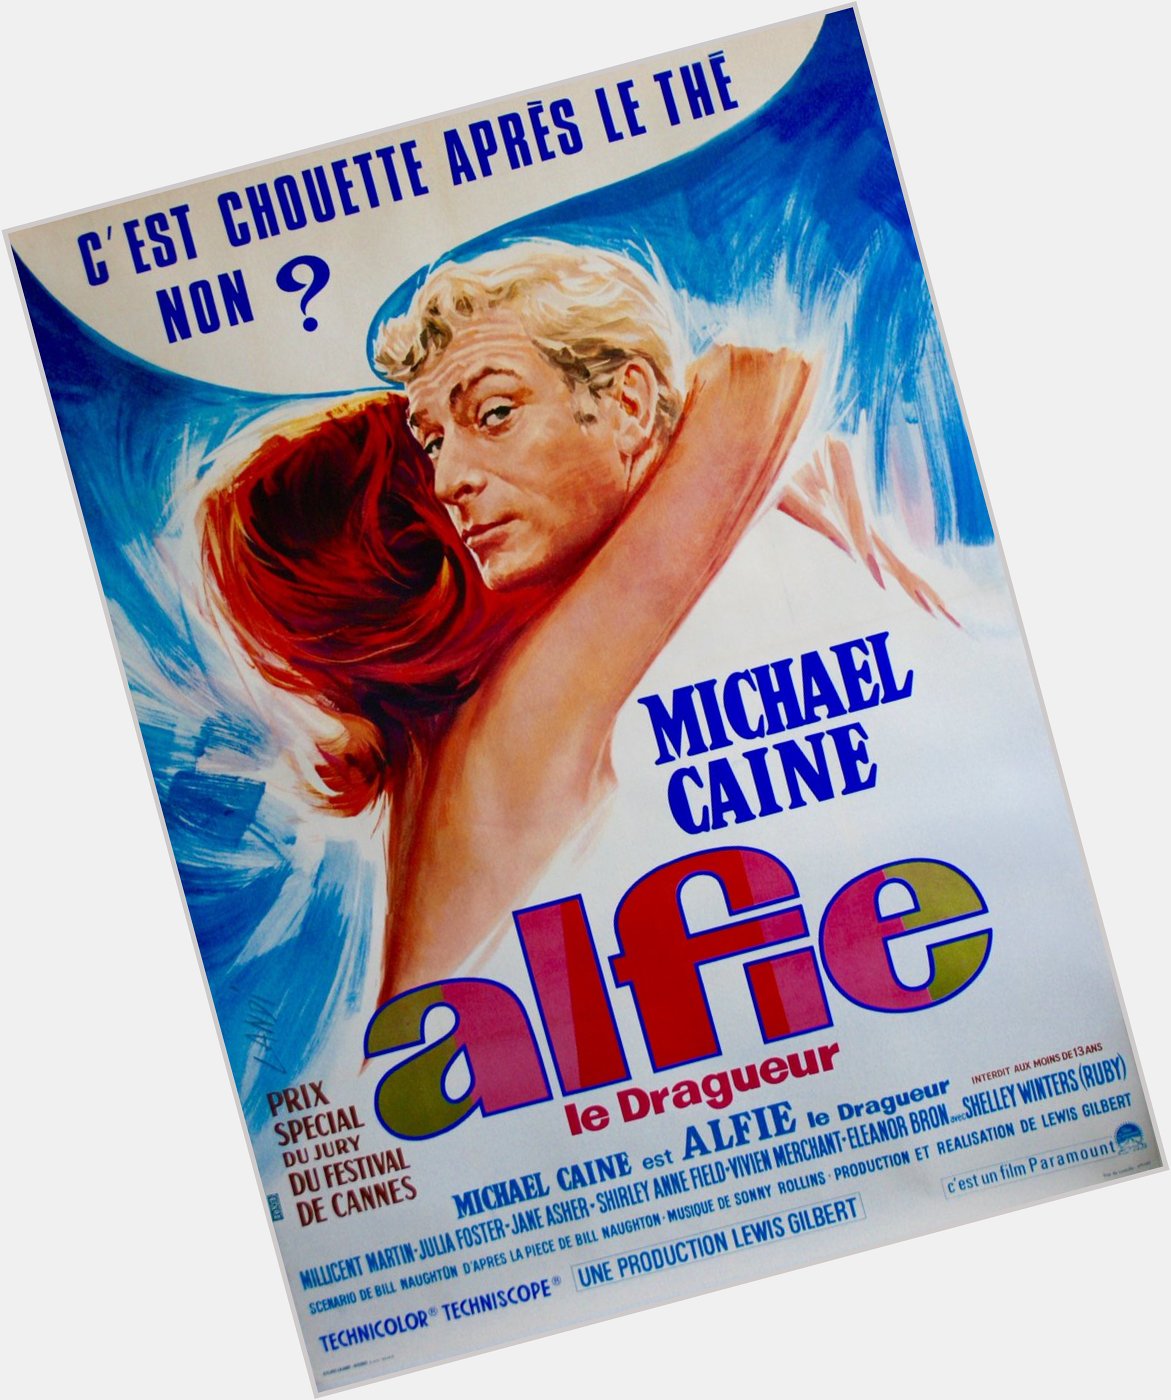 Happy birthday to Michael Caine - ALFIE - 1966 - French release poster - Art by Michel Landi 